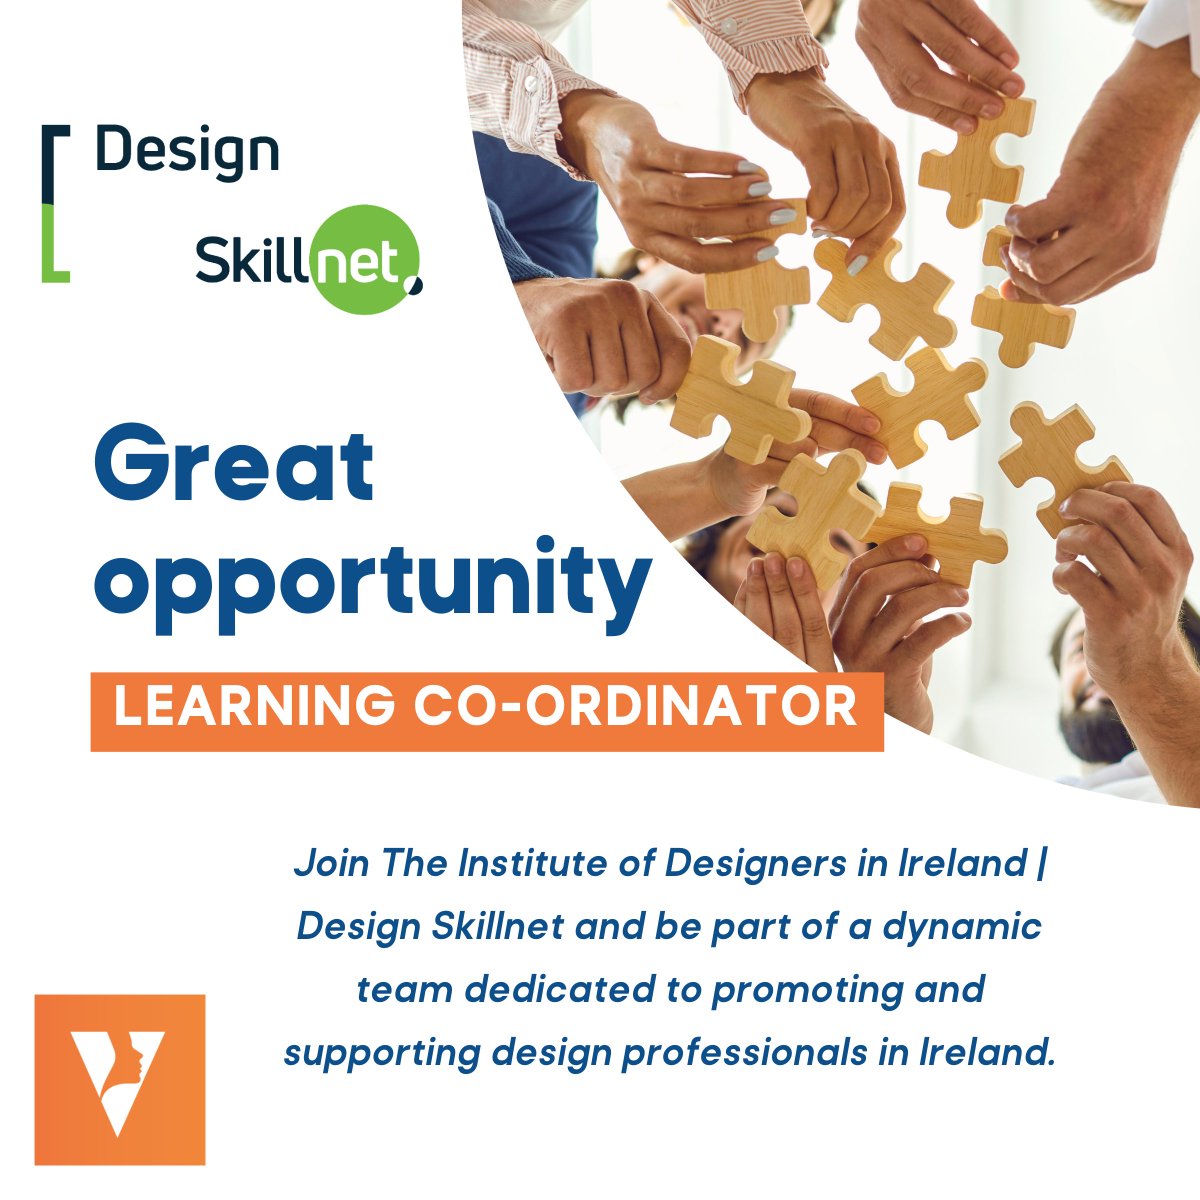 Join the team at @IDIIreland | @DesignSkillnet as a Learning Co-ordinator! Initially a fixed-term contract until Dec 2025, with the potential for a permanent role thereafter. voltedge.hirehive.com/learning-co-or…